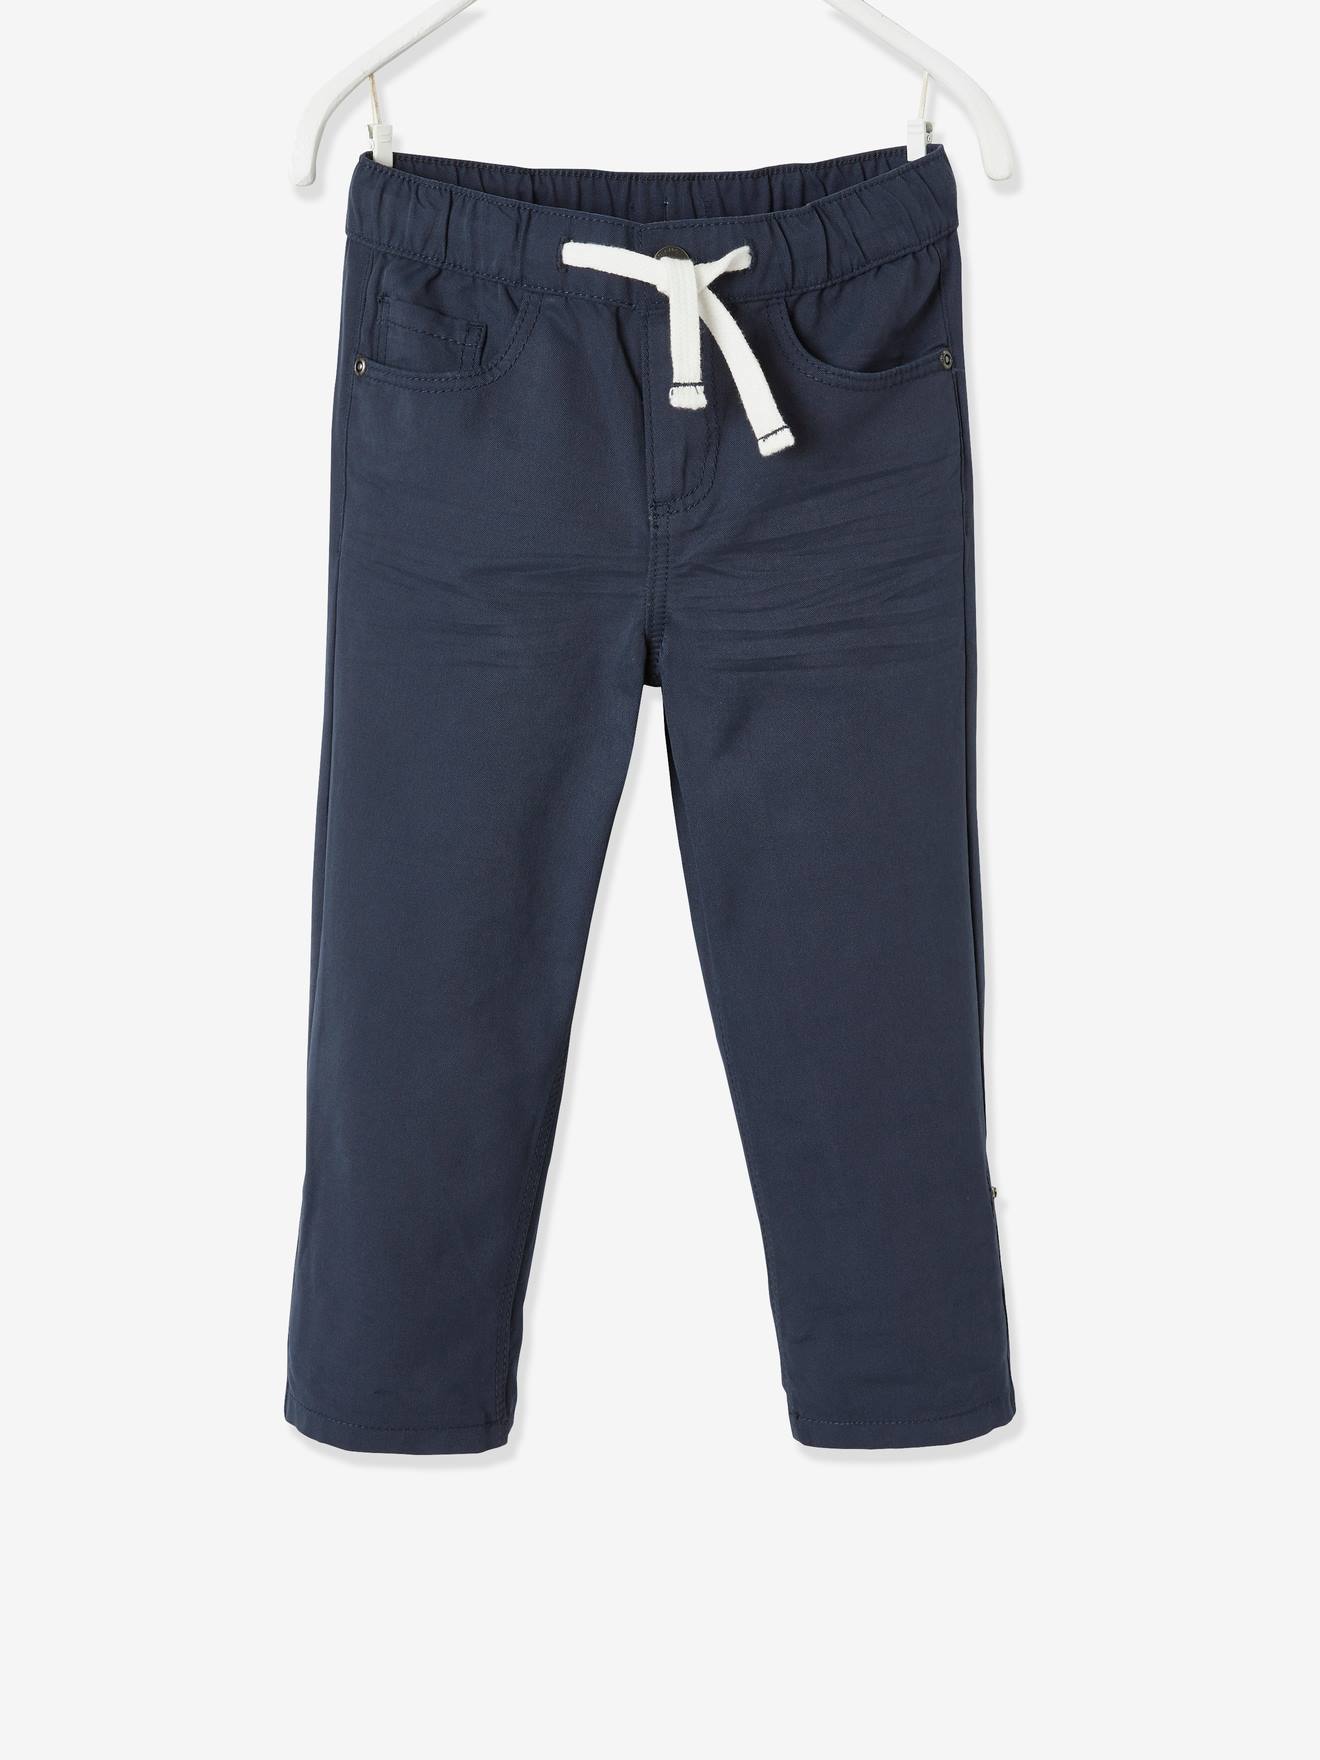 Navy blue year-round Trousers